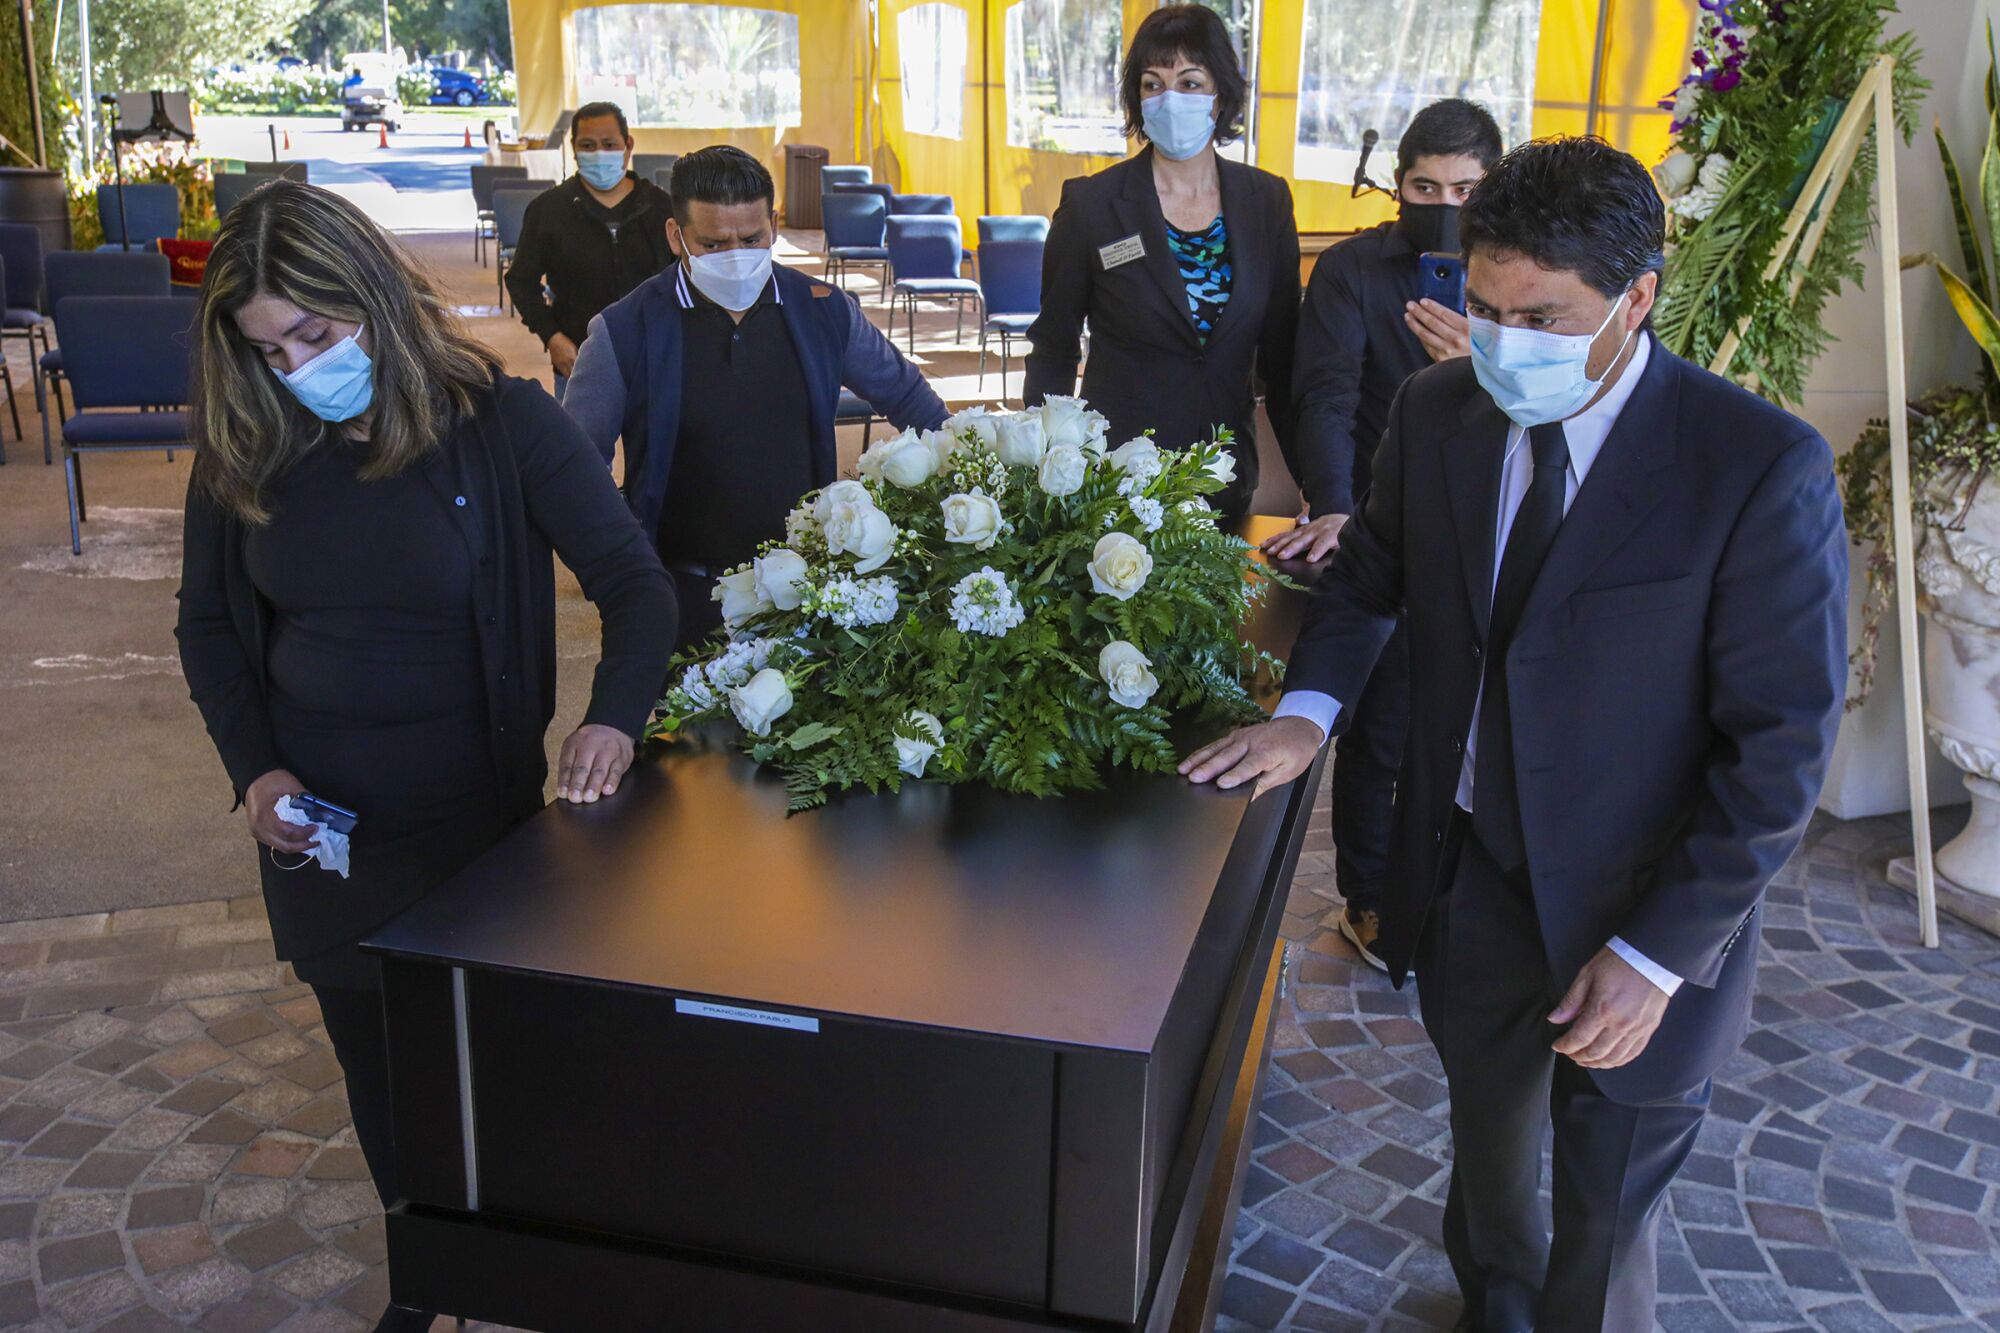 Family members escort a coffin.